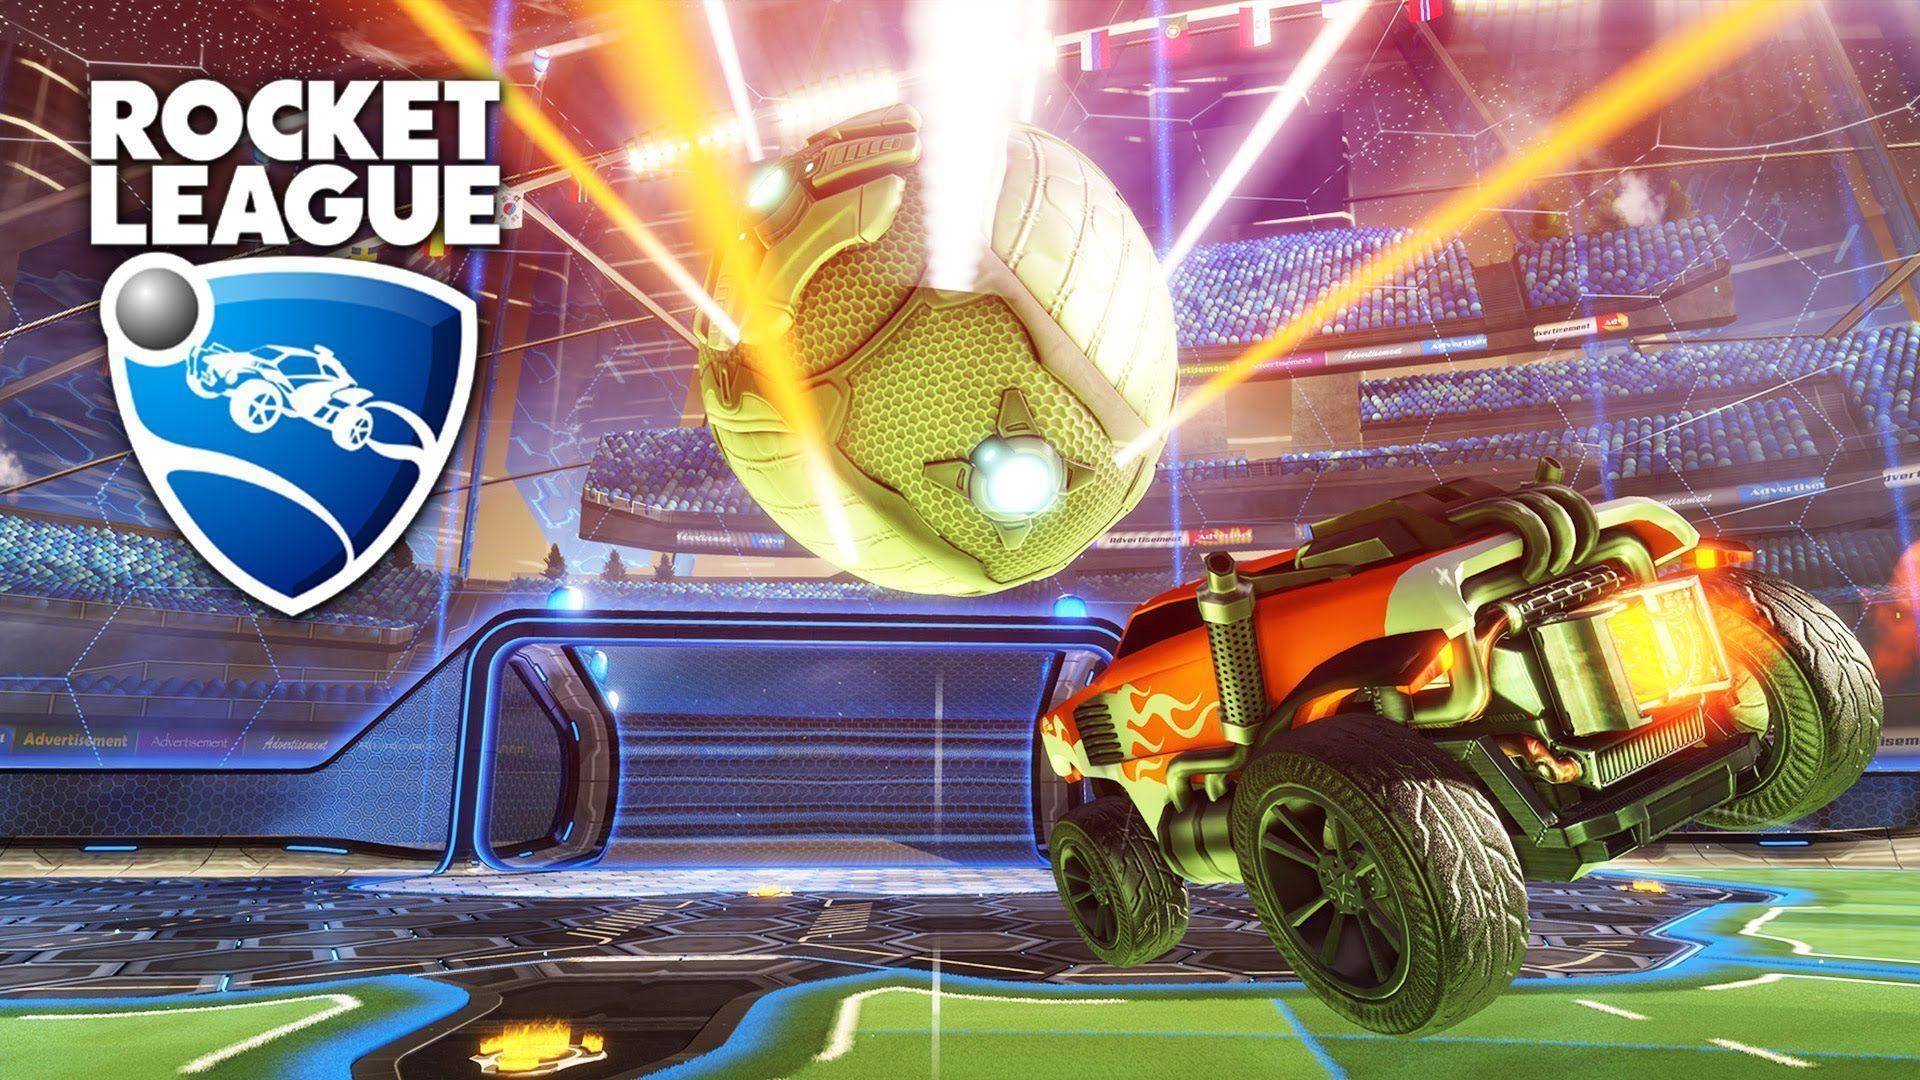 The Start Of Autumn Signals The Return of Rocket League Championship Series